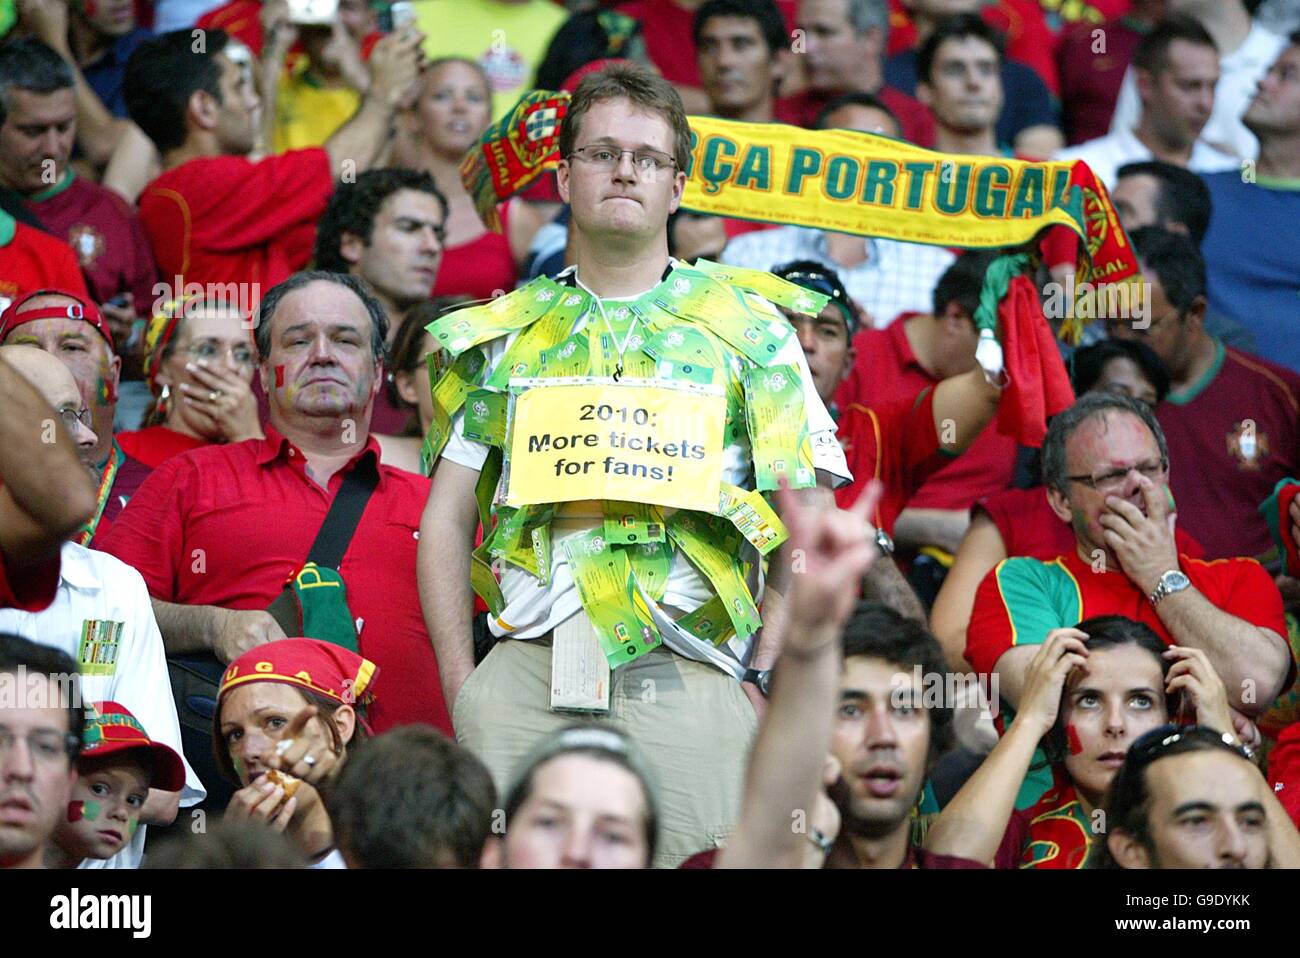 A Portugal fan wears a sign around his neck requesting more tickets to be made avaiable for fans at the next world cup in South Africa Stock Photo